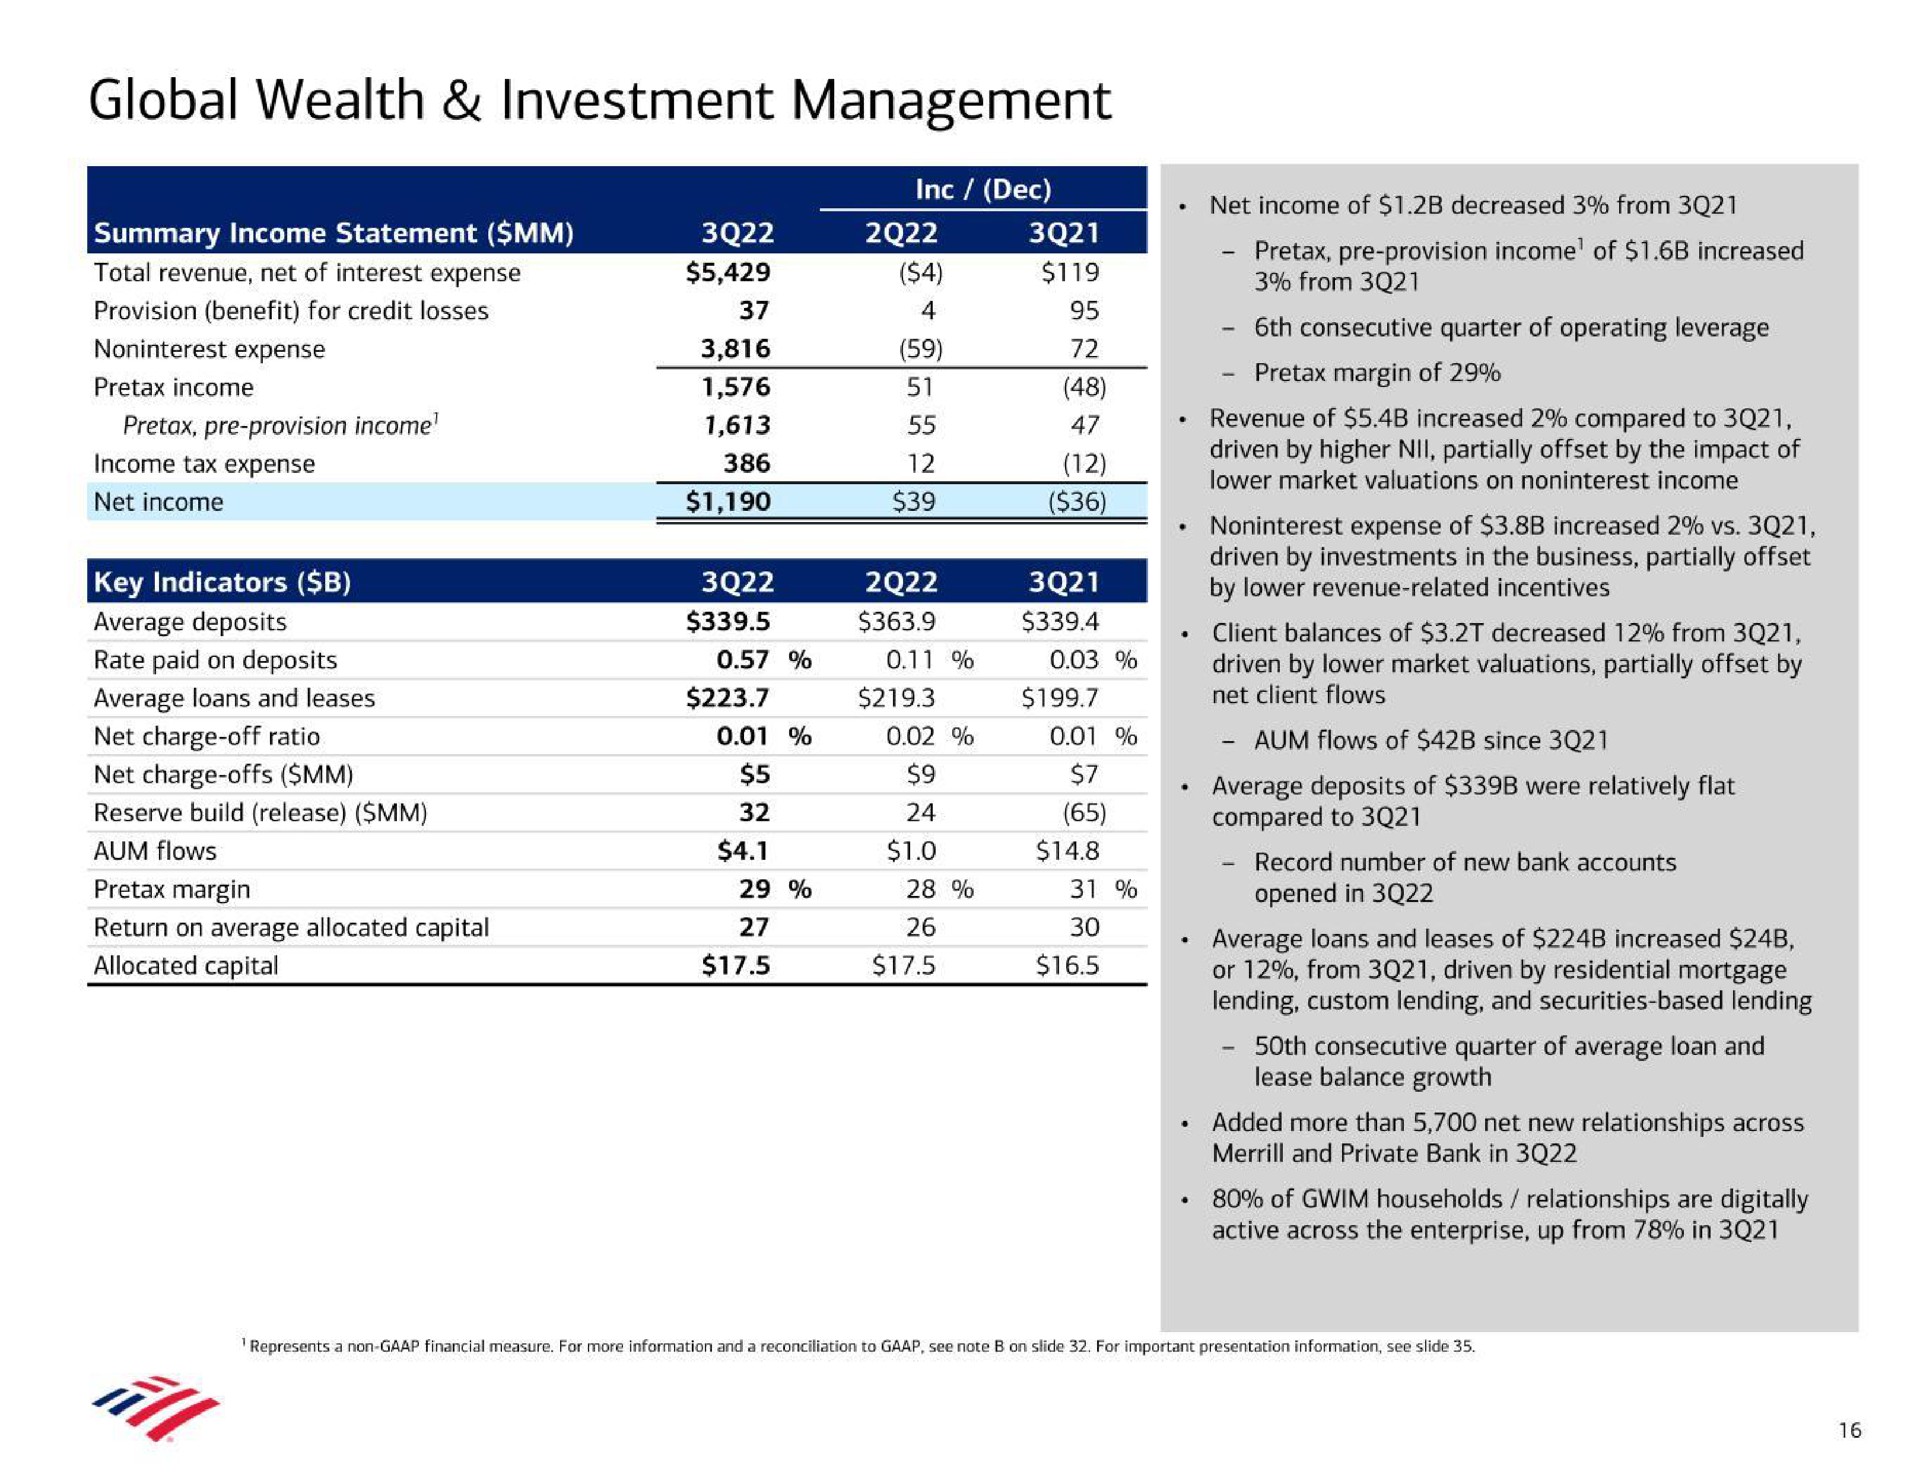 global wealth investment management income return on average allocated capital allocated capital pete warns average loans and leases of increased or from driven by residential mortgage | Bank of America